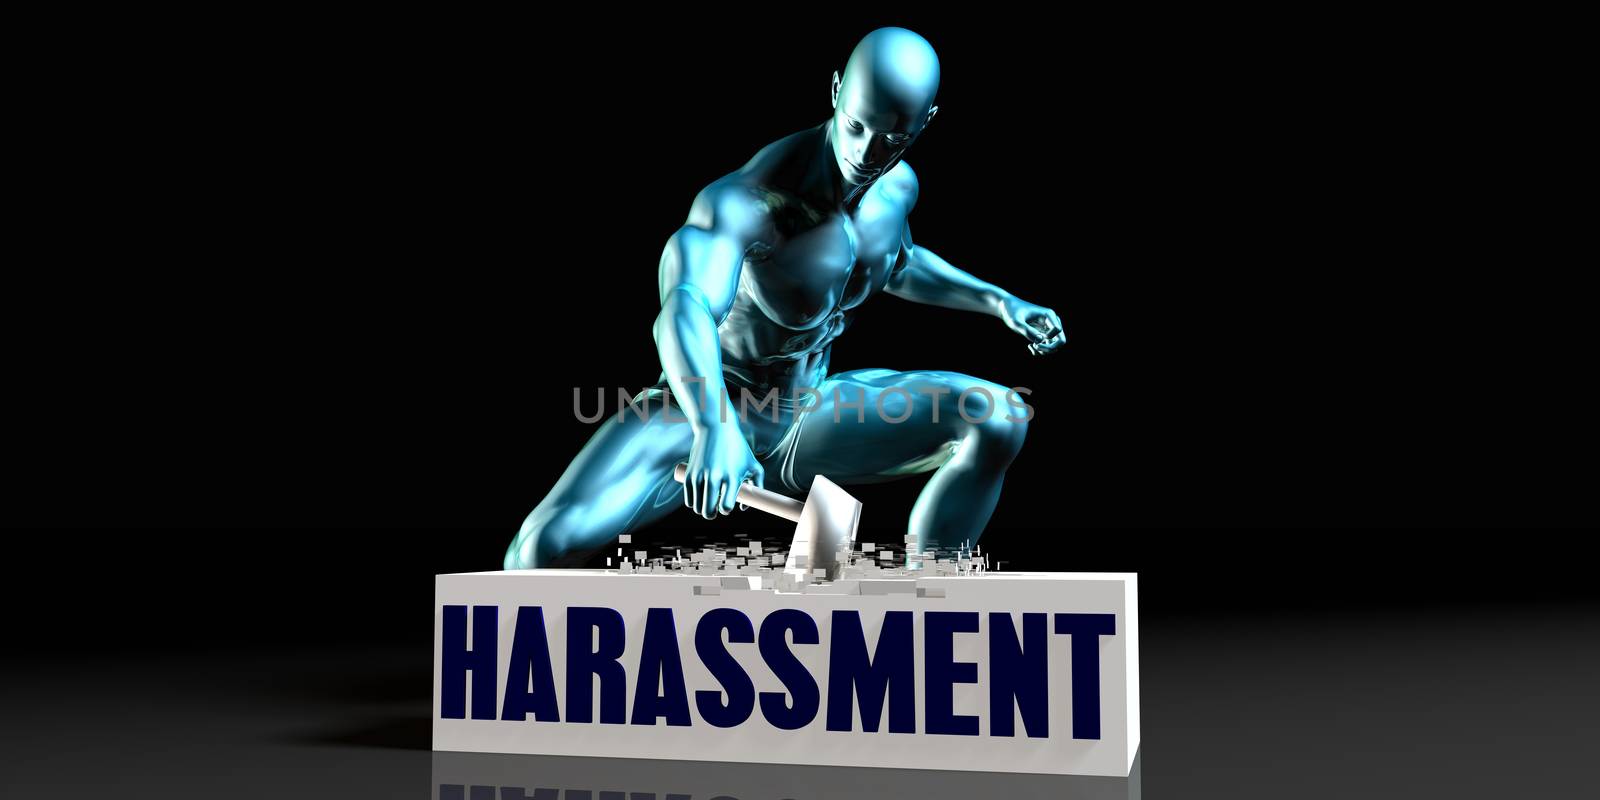 Get Rid of Harassment by kentoh